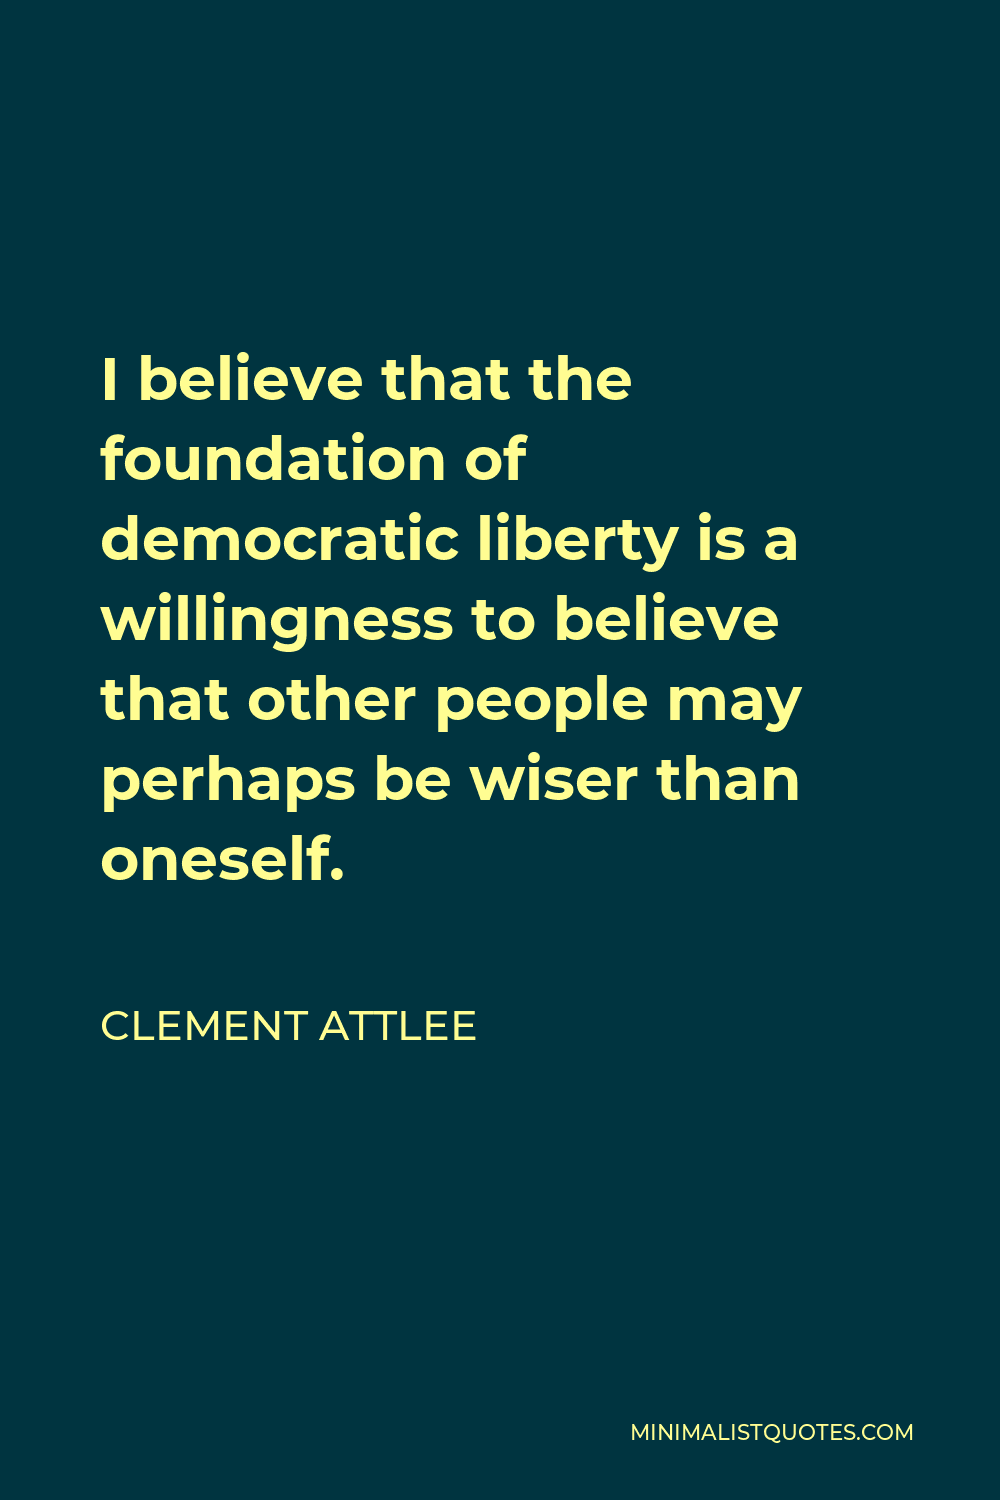 Clement Attlee Quote - I believe that the foundation of democratic liberty is a willingness to believe that other people may perhaps be wiser than oneself.